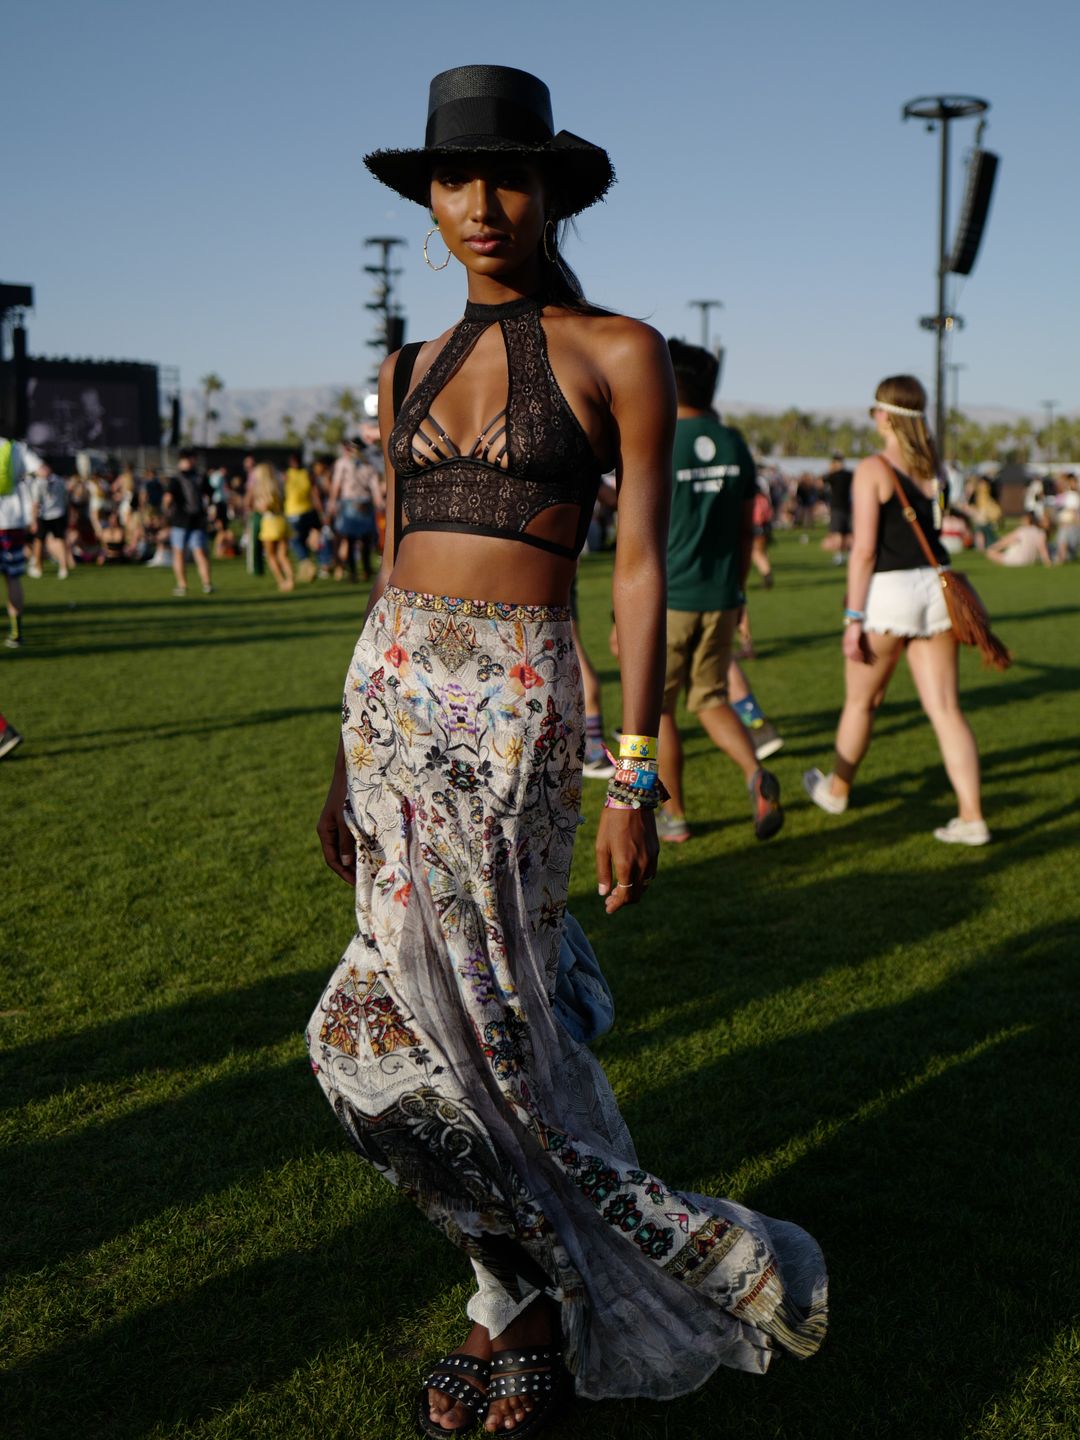 Jasmine Tookes wearing a Victoria Secret BH during day 1 of the 2018 Coachella